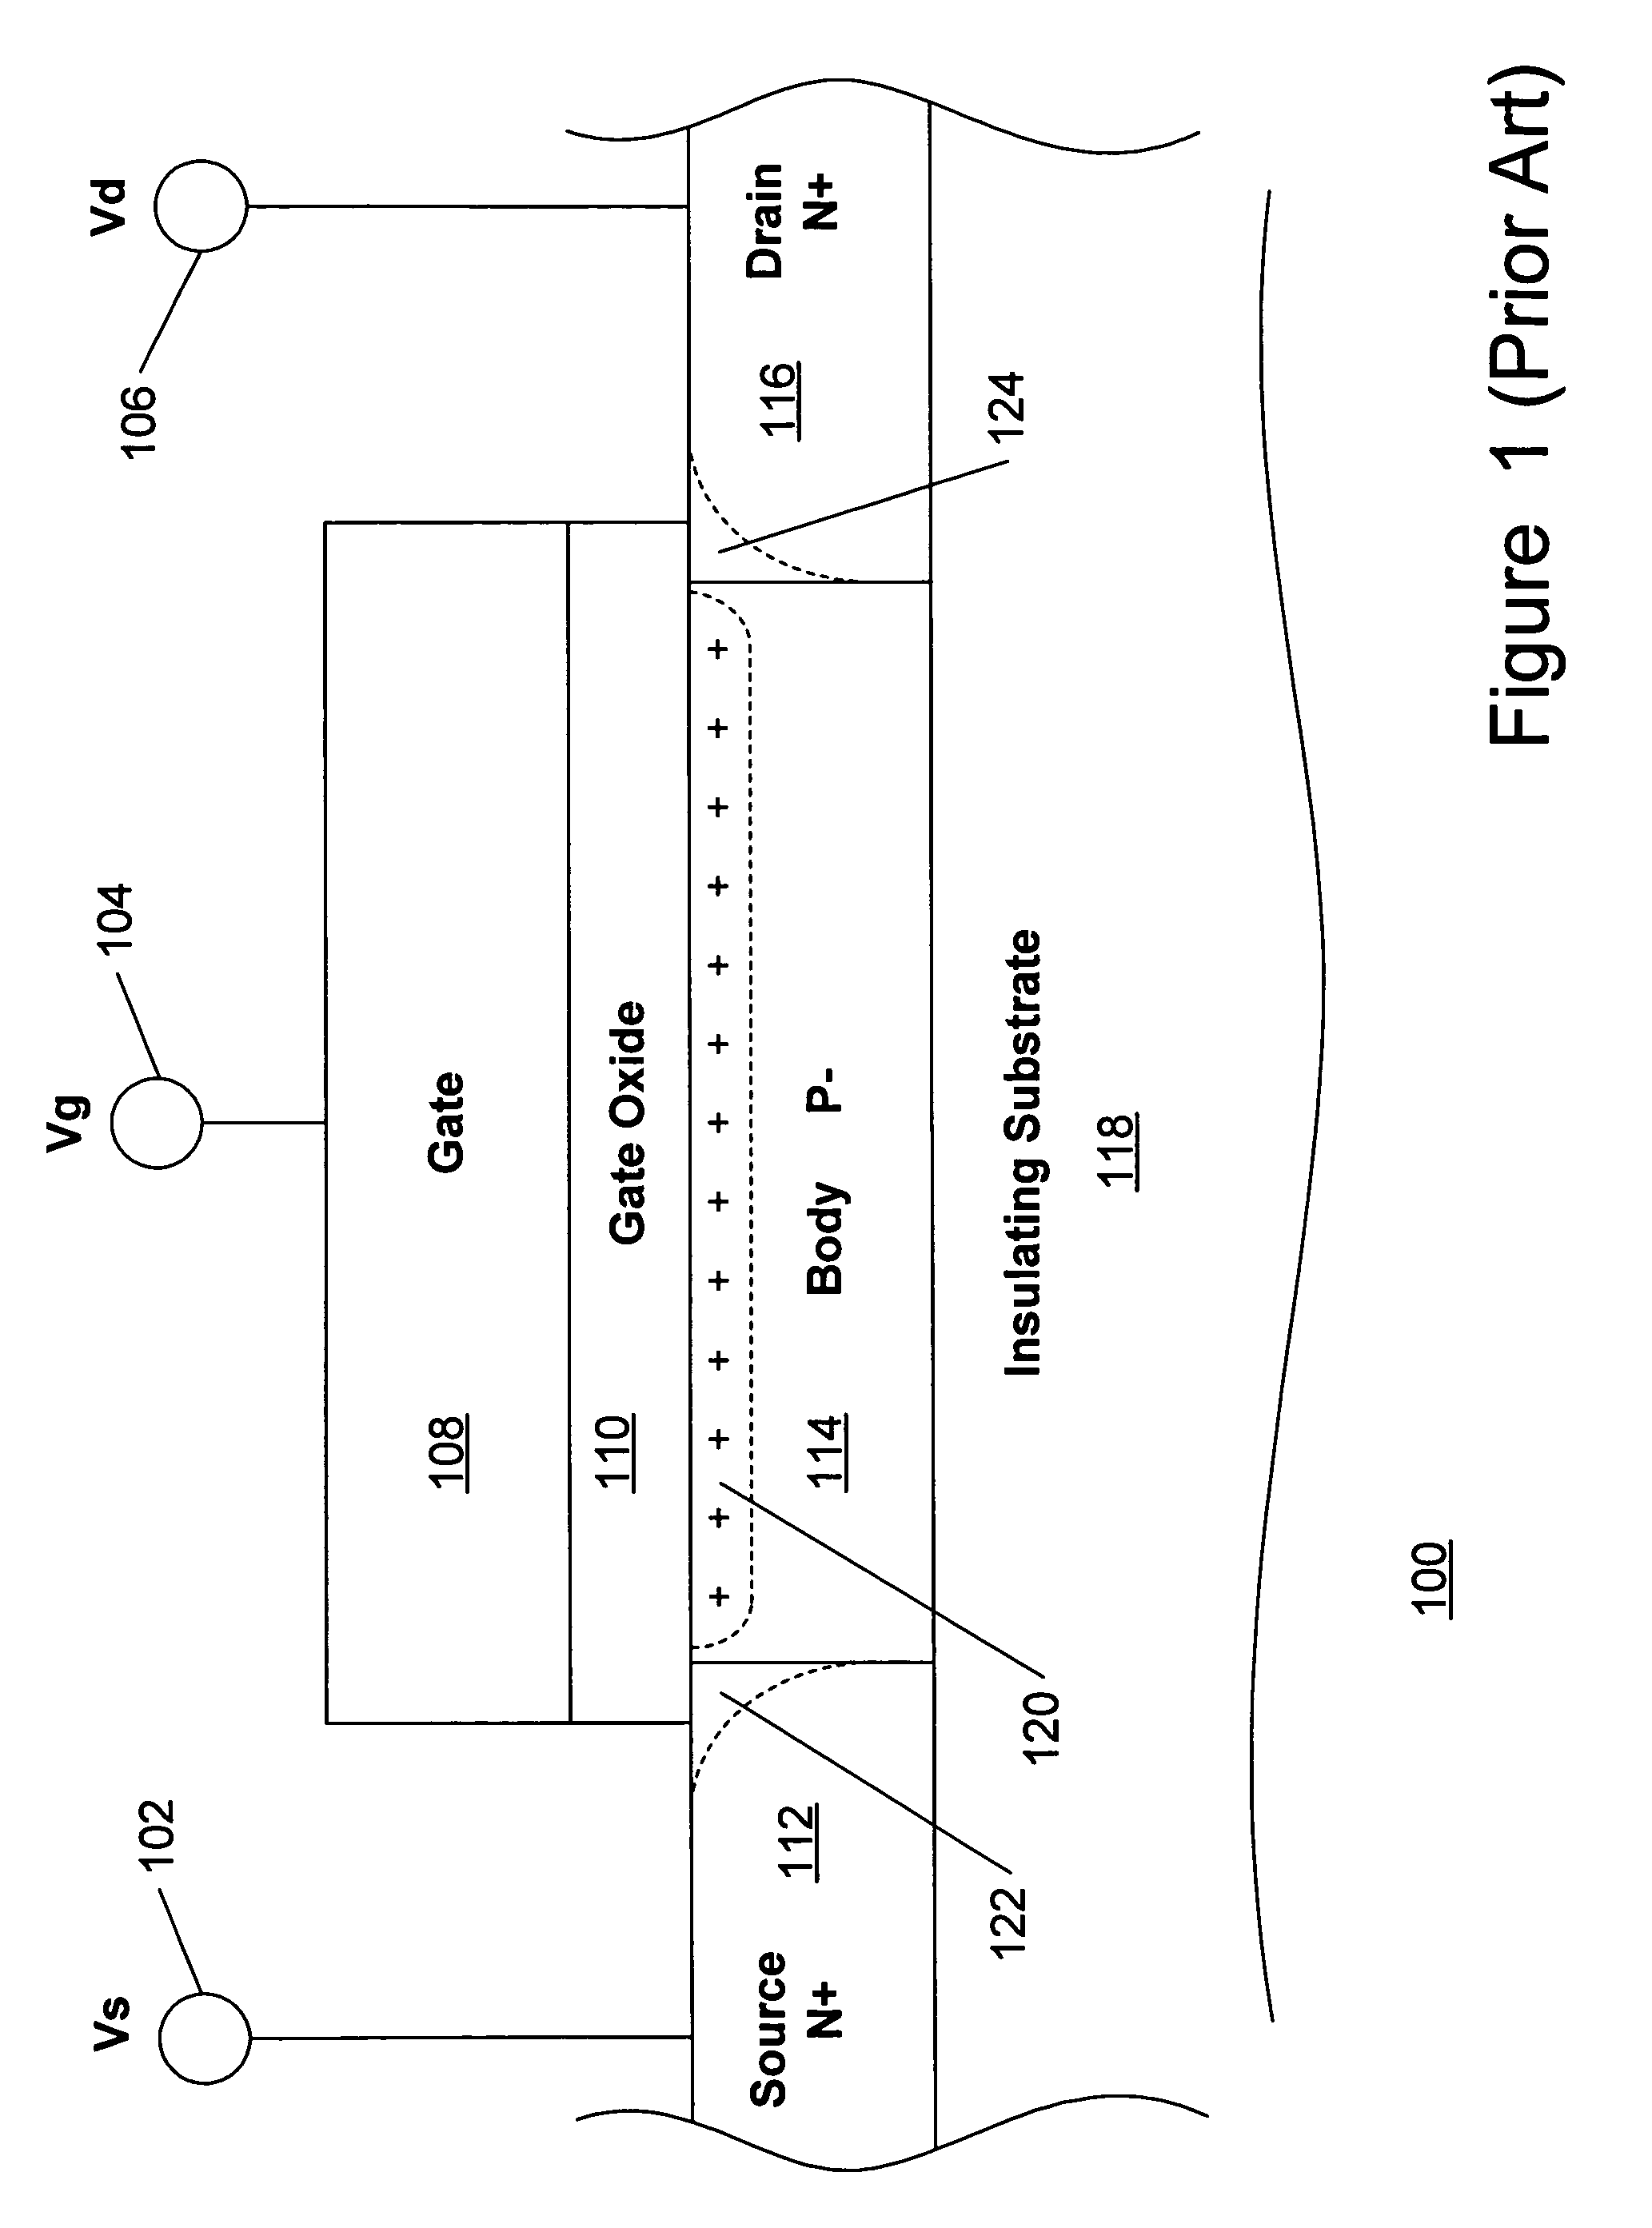 Method and apparatus for use in improving linearity of MOSFET's using an accumulated charge sink